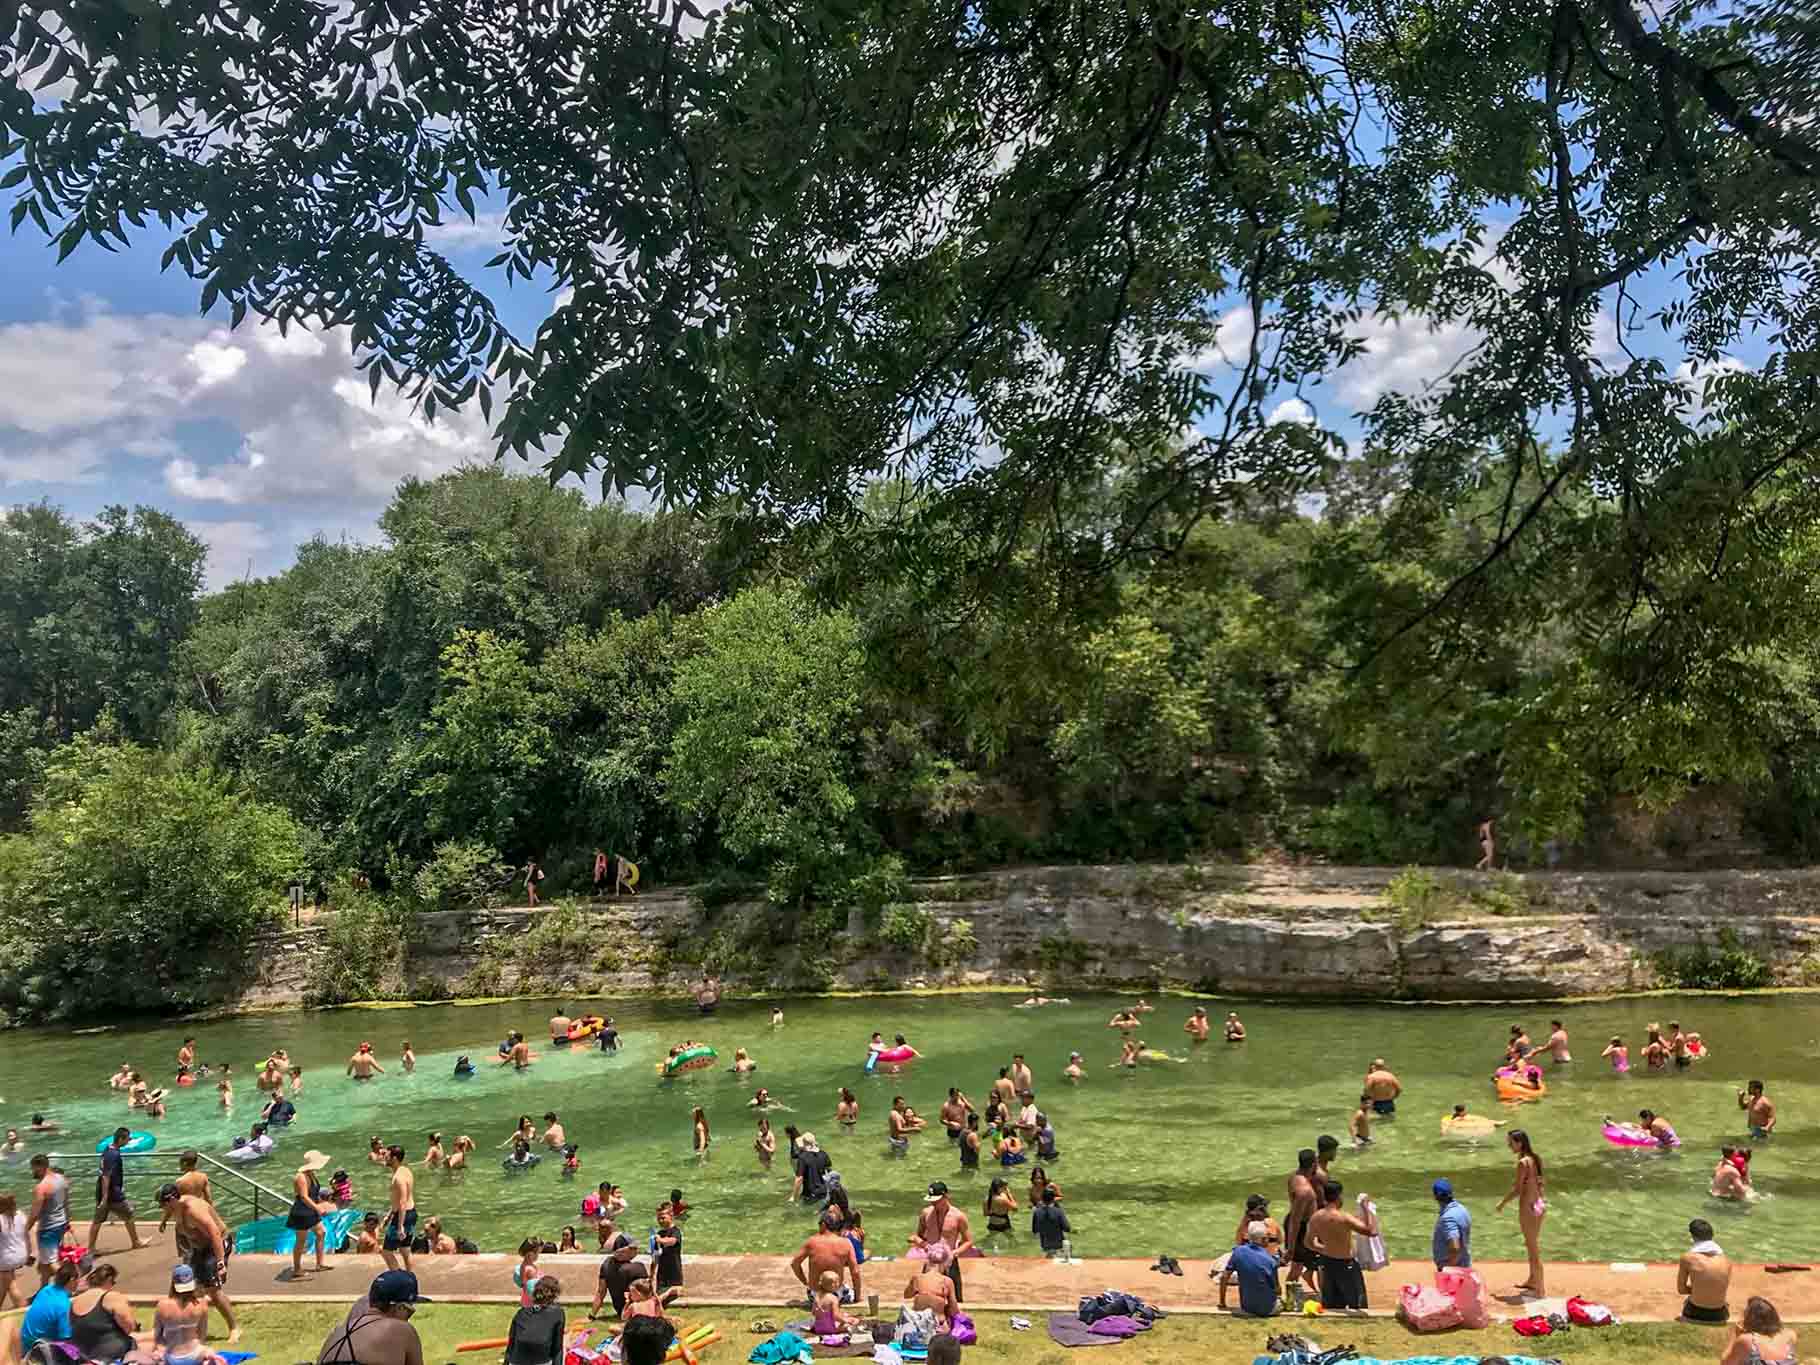 People swimming and relaxing in the natural spring at Barton Springs Pool.